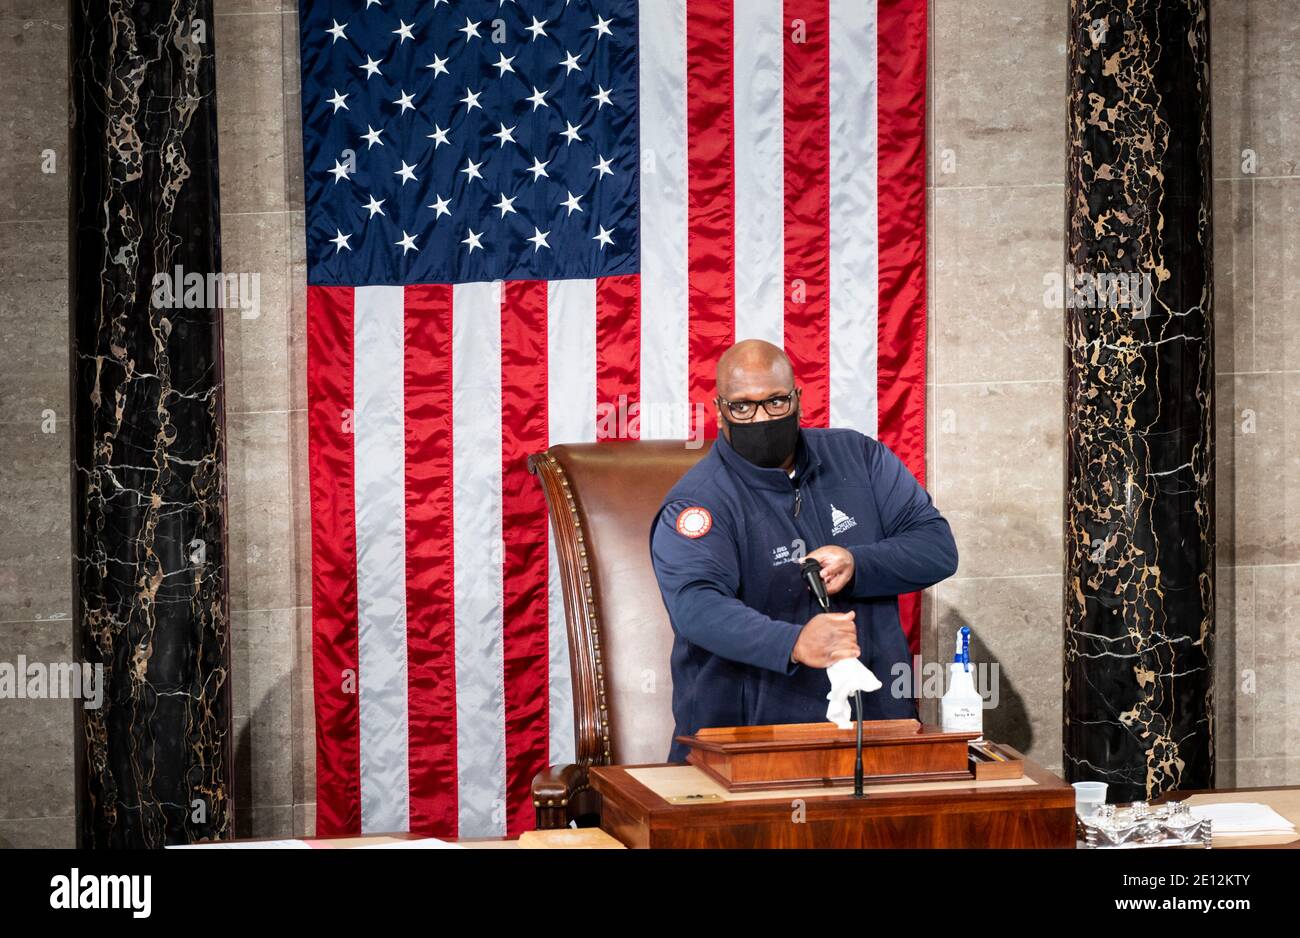 United States Capitol workers disinfect the House floor in the Capitol before members of the 117th Congress are sworn in on Sunday, January 3, 2021.Credit: Bill Clark/Pool via CNP /MediaPunch Stock Photo